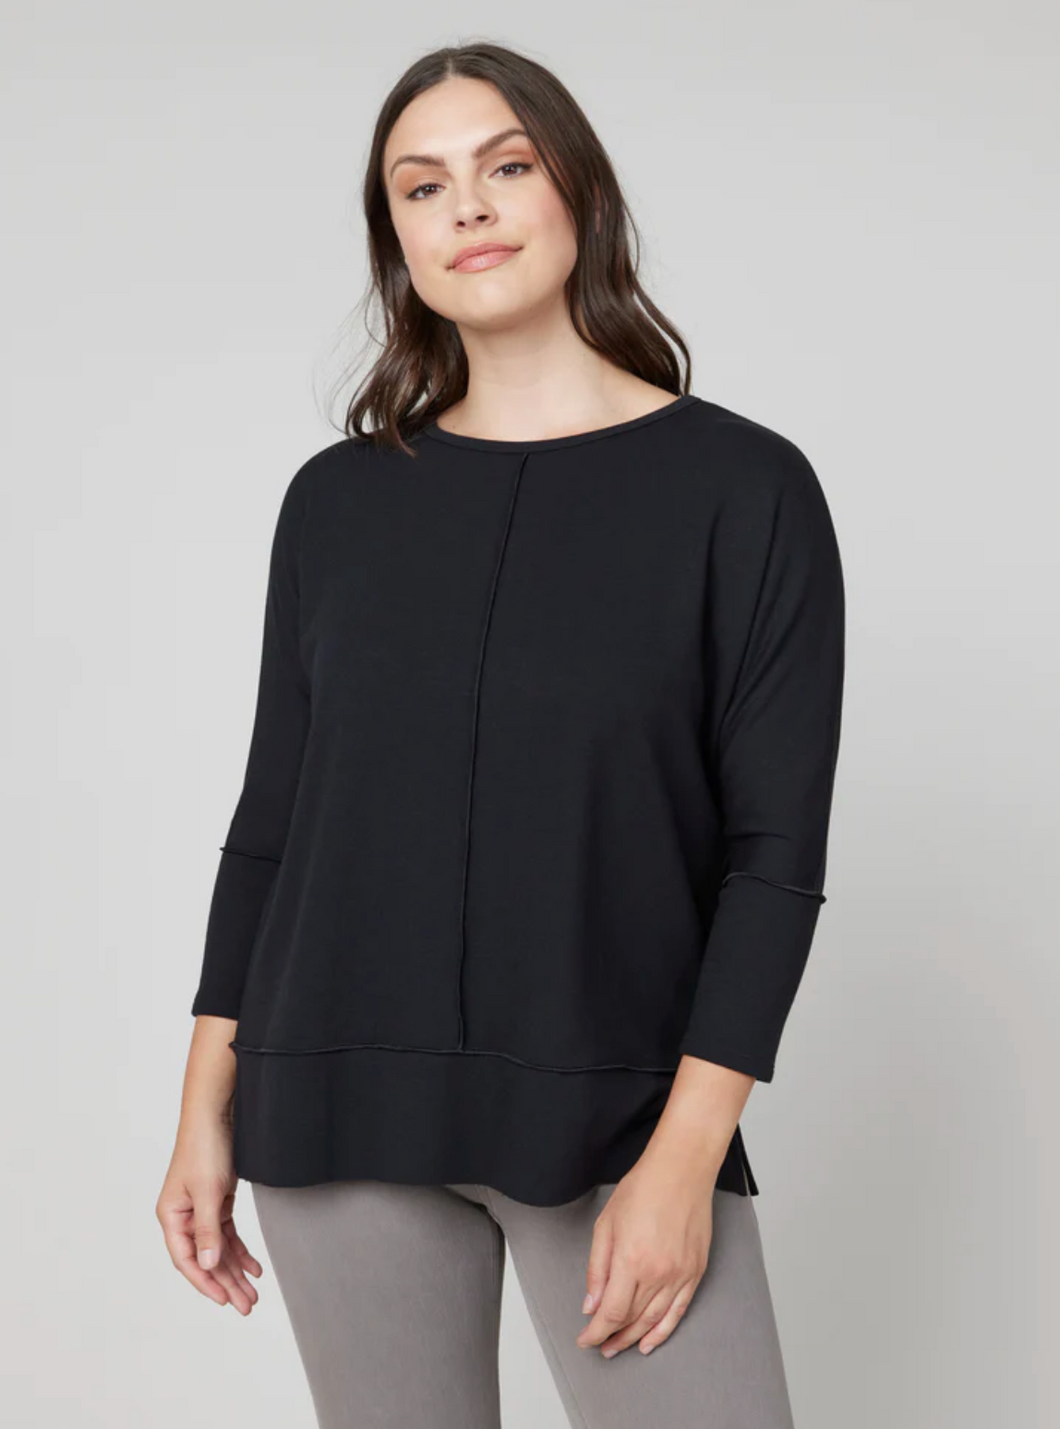 Dolman Perfect Length Top in Black